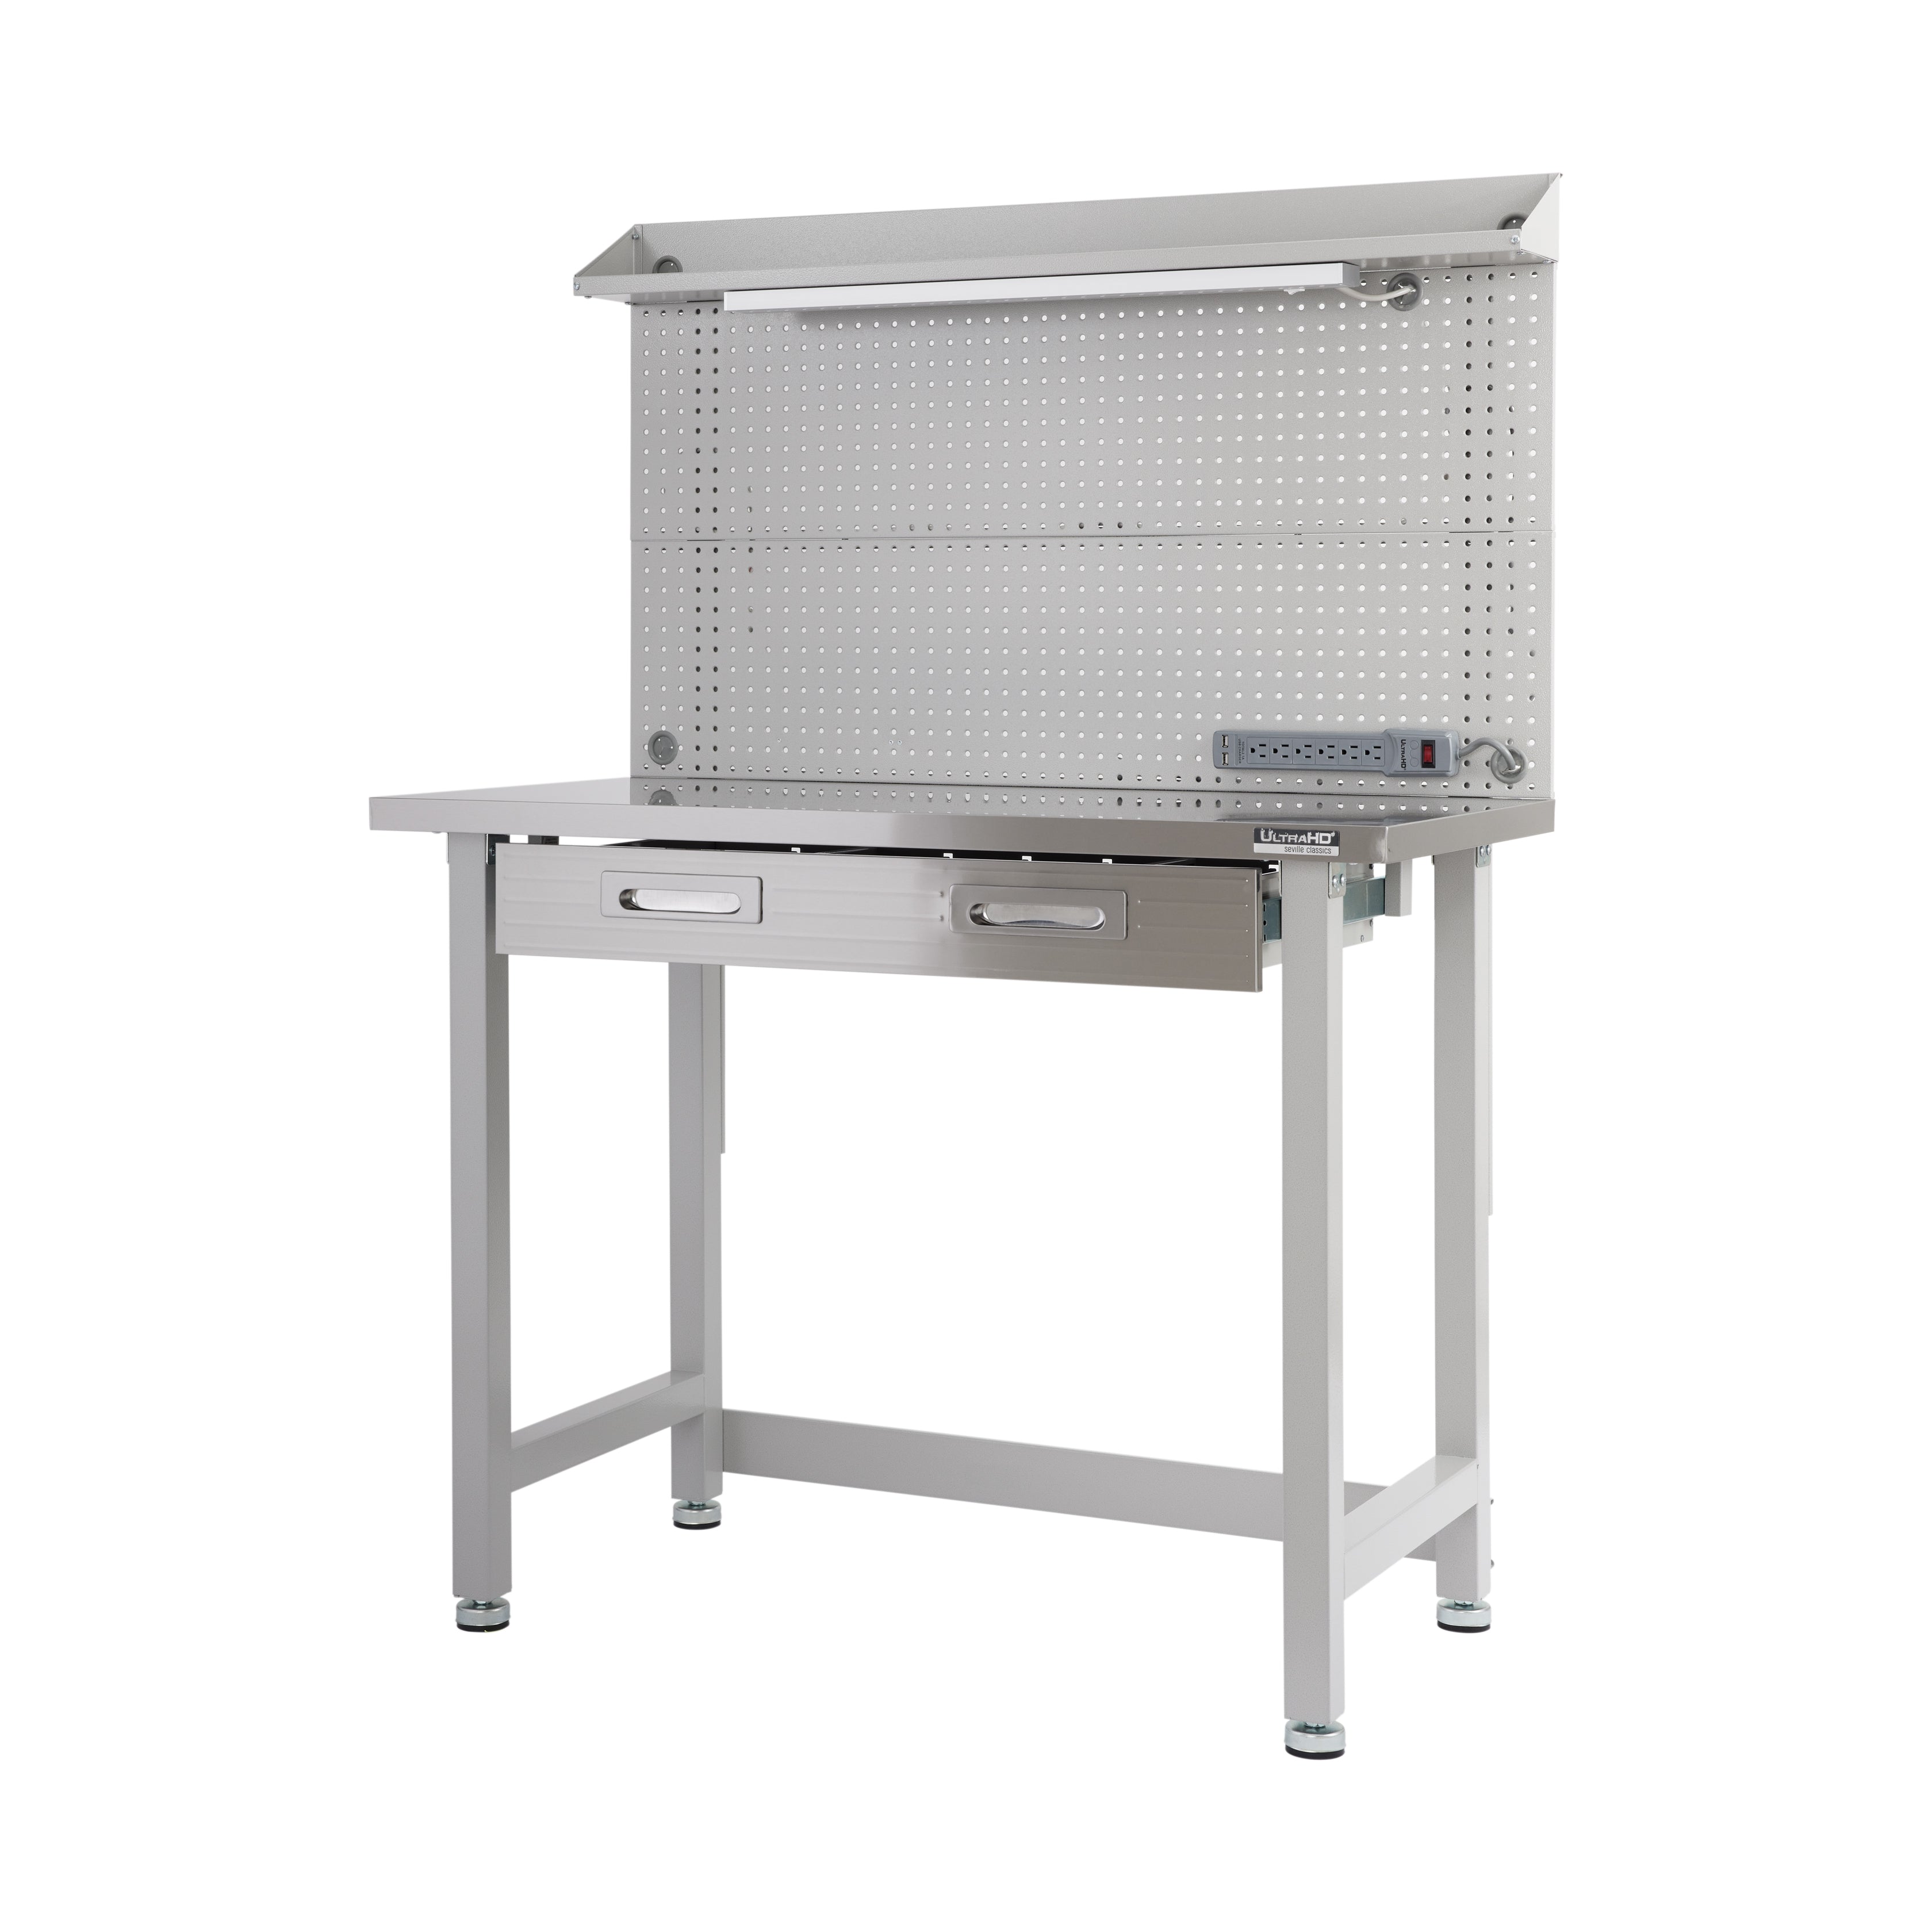 Seville Classics UltraHD Lighted Stainless Steel Top Workcenter